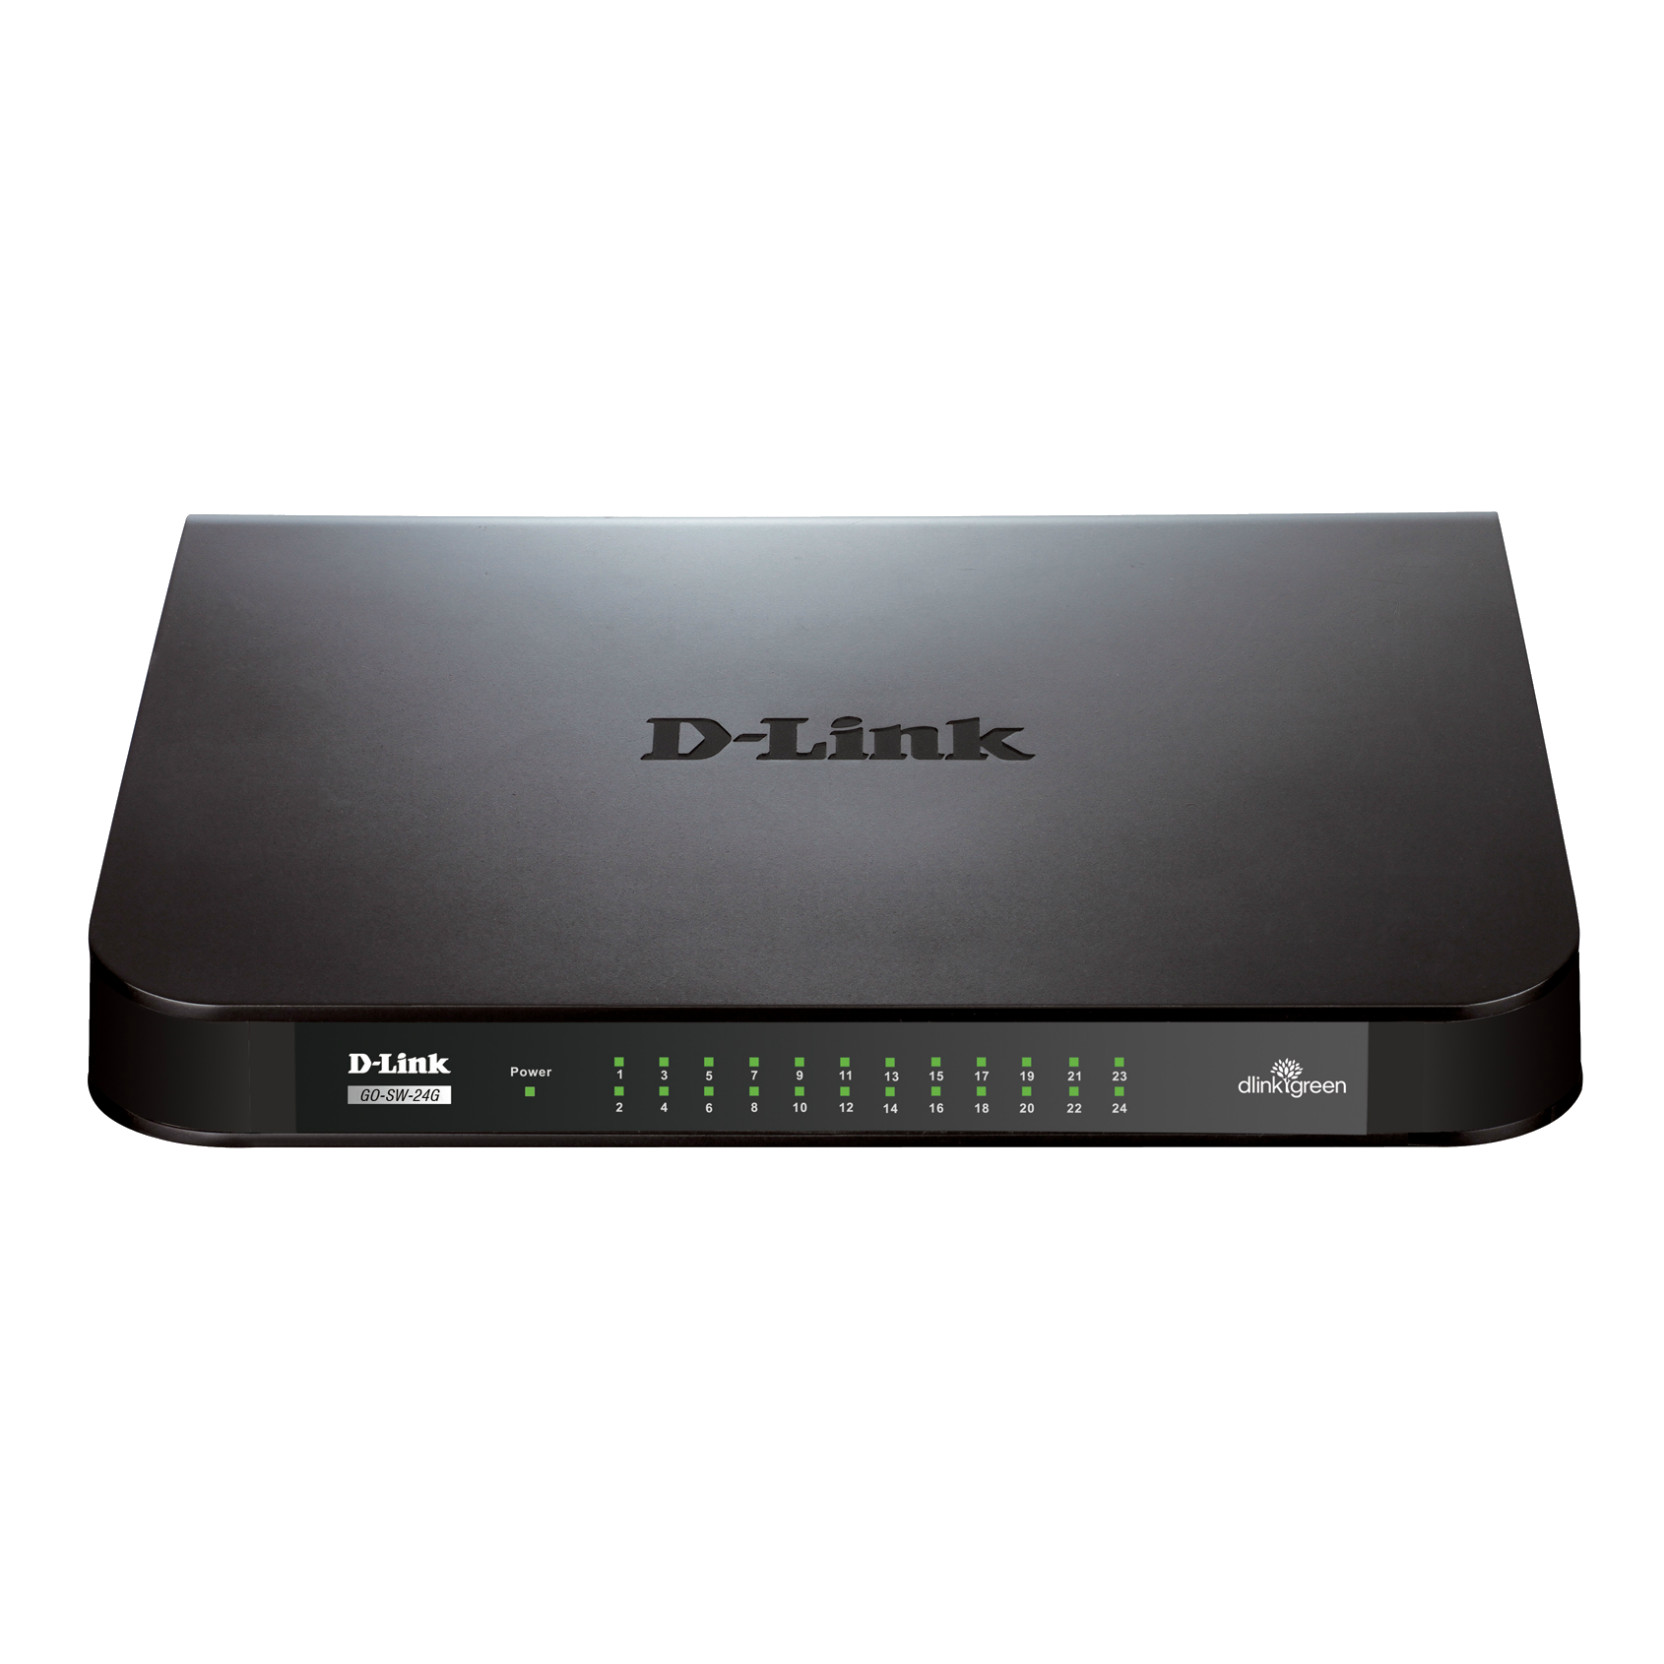  Switch D-Link GO-SW-24G 